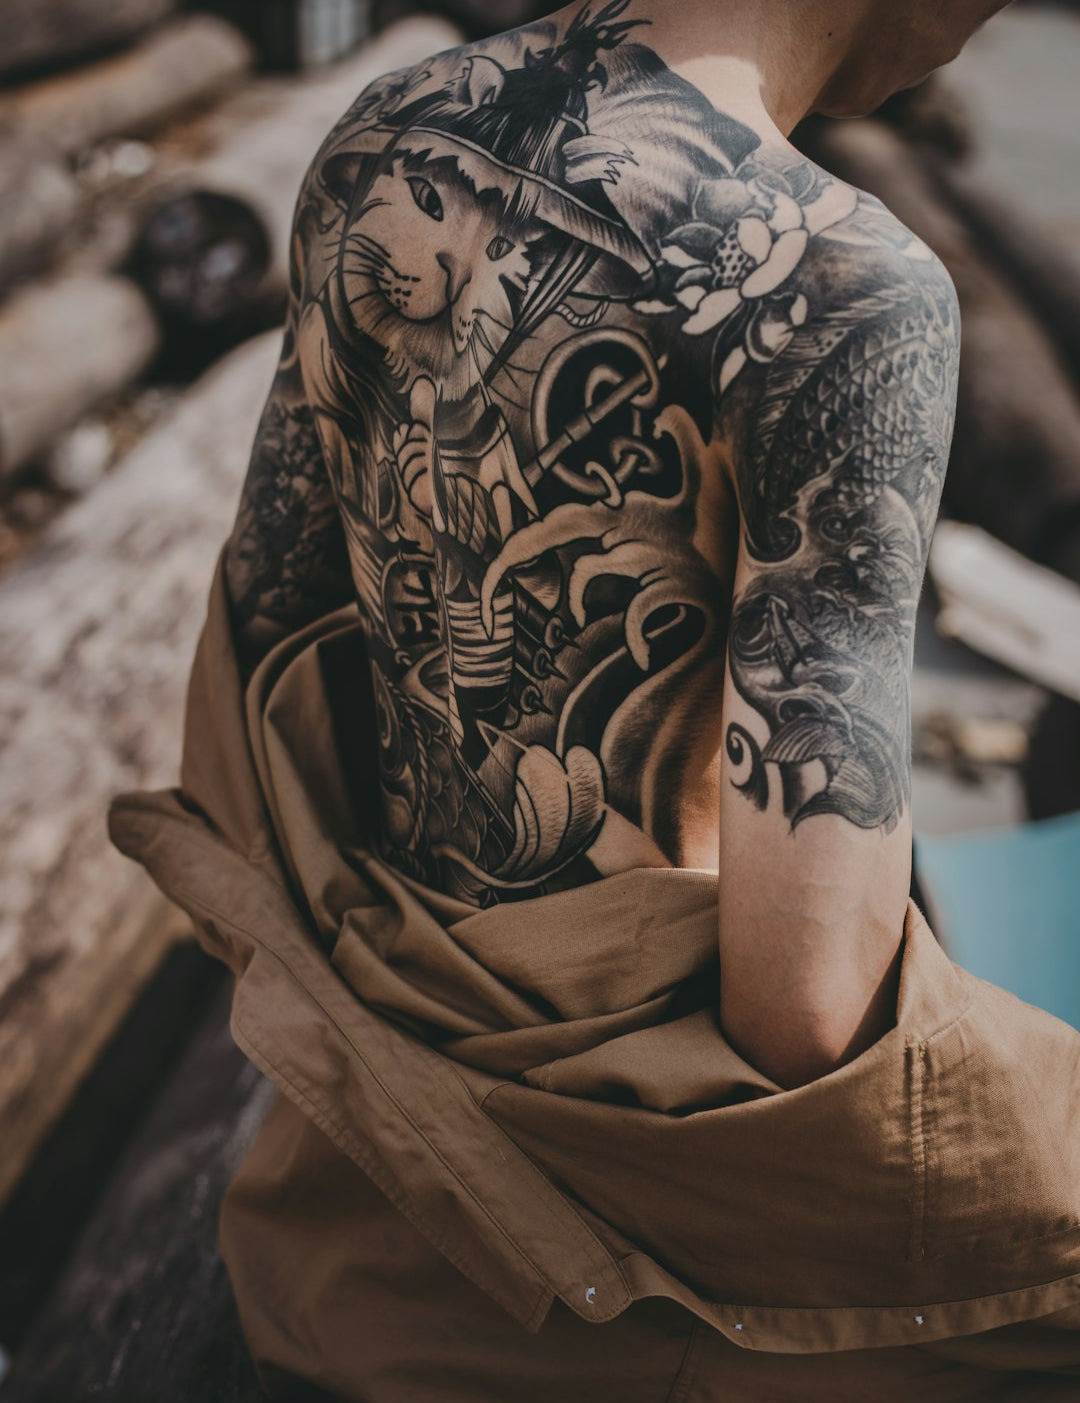 Finding the Right Tattoo Artist: Tips and Considerations